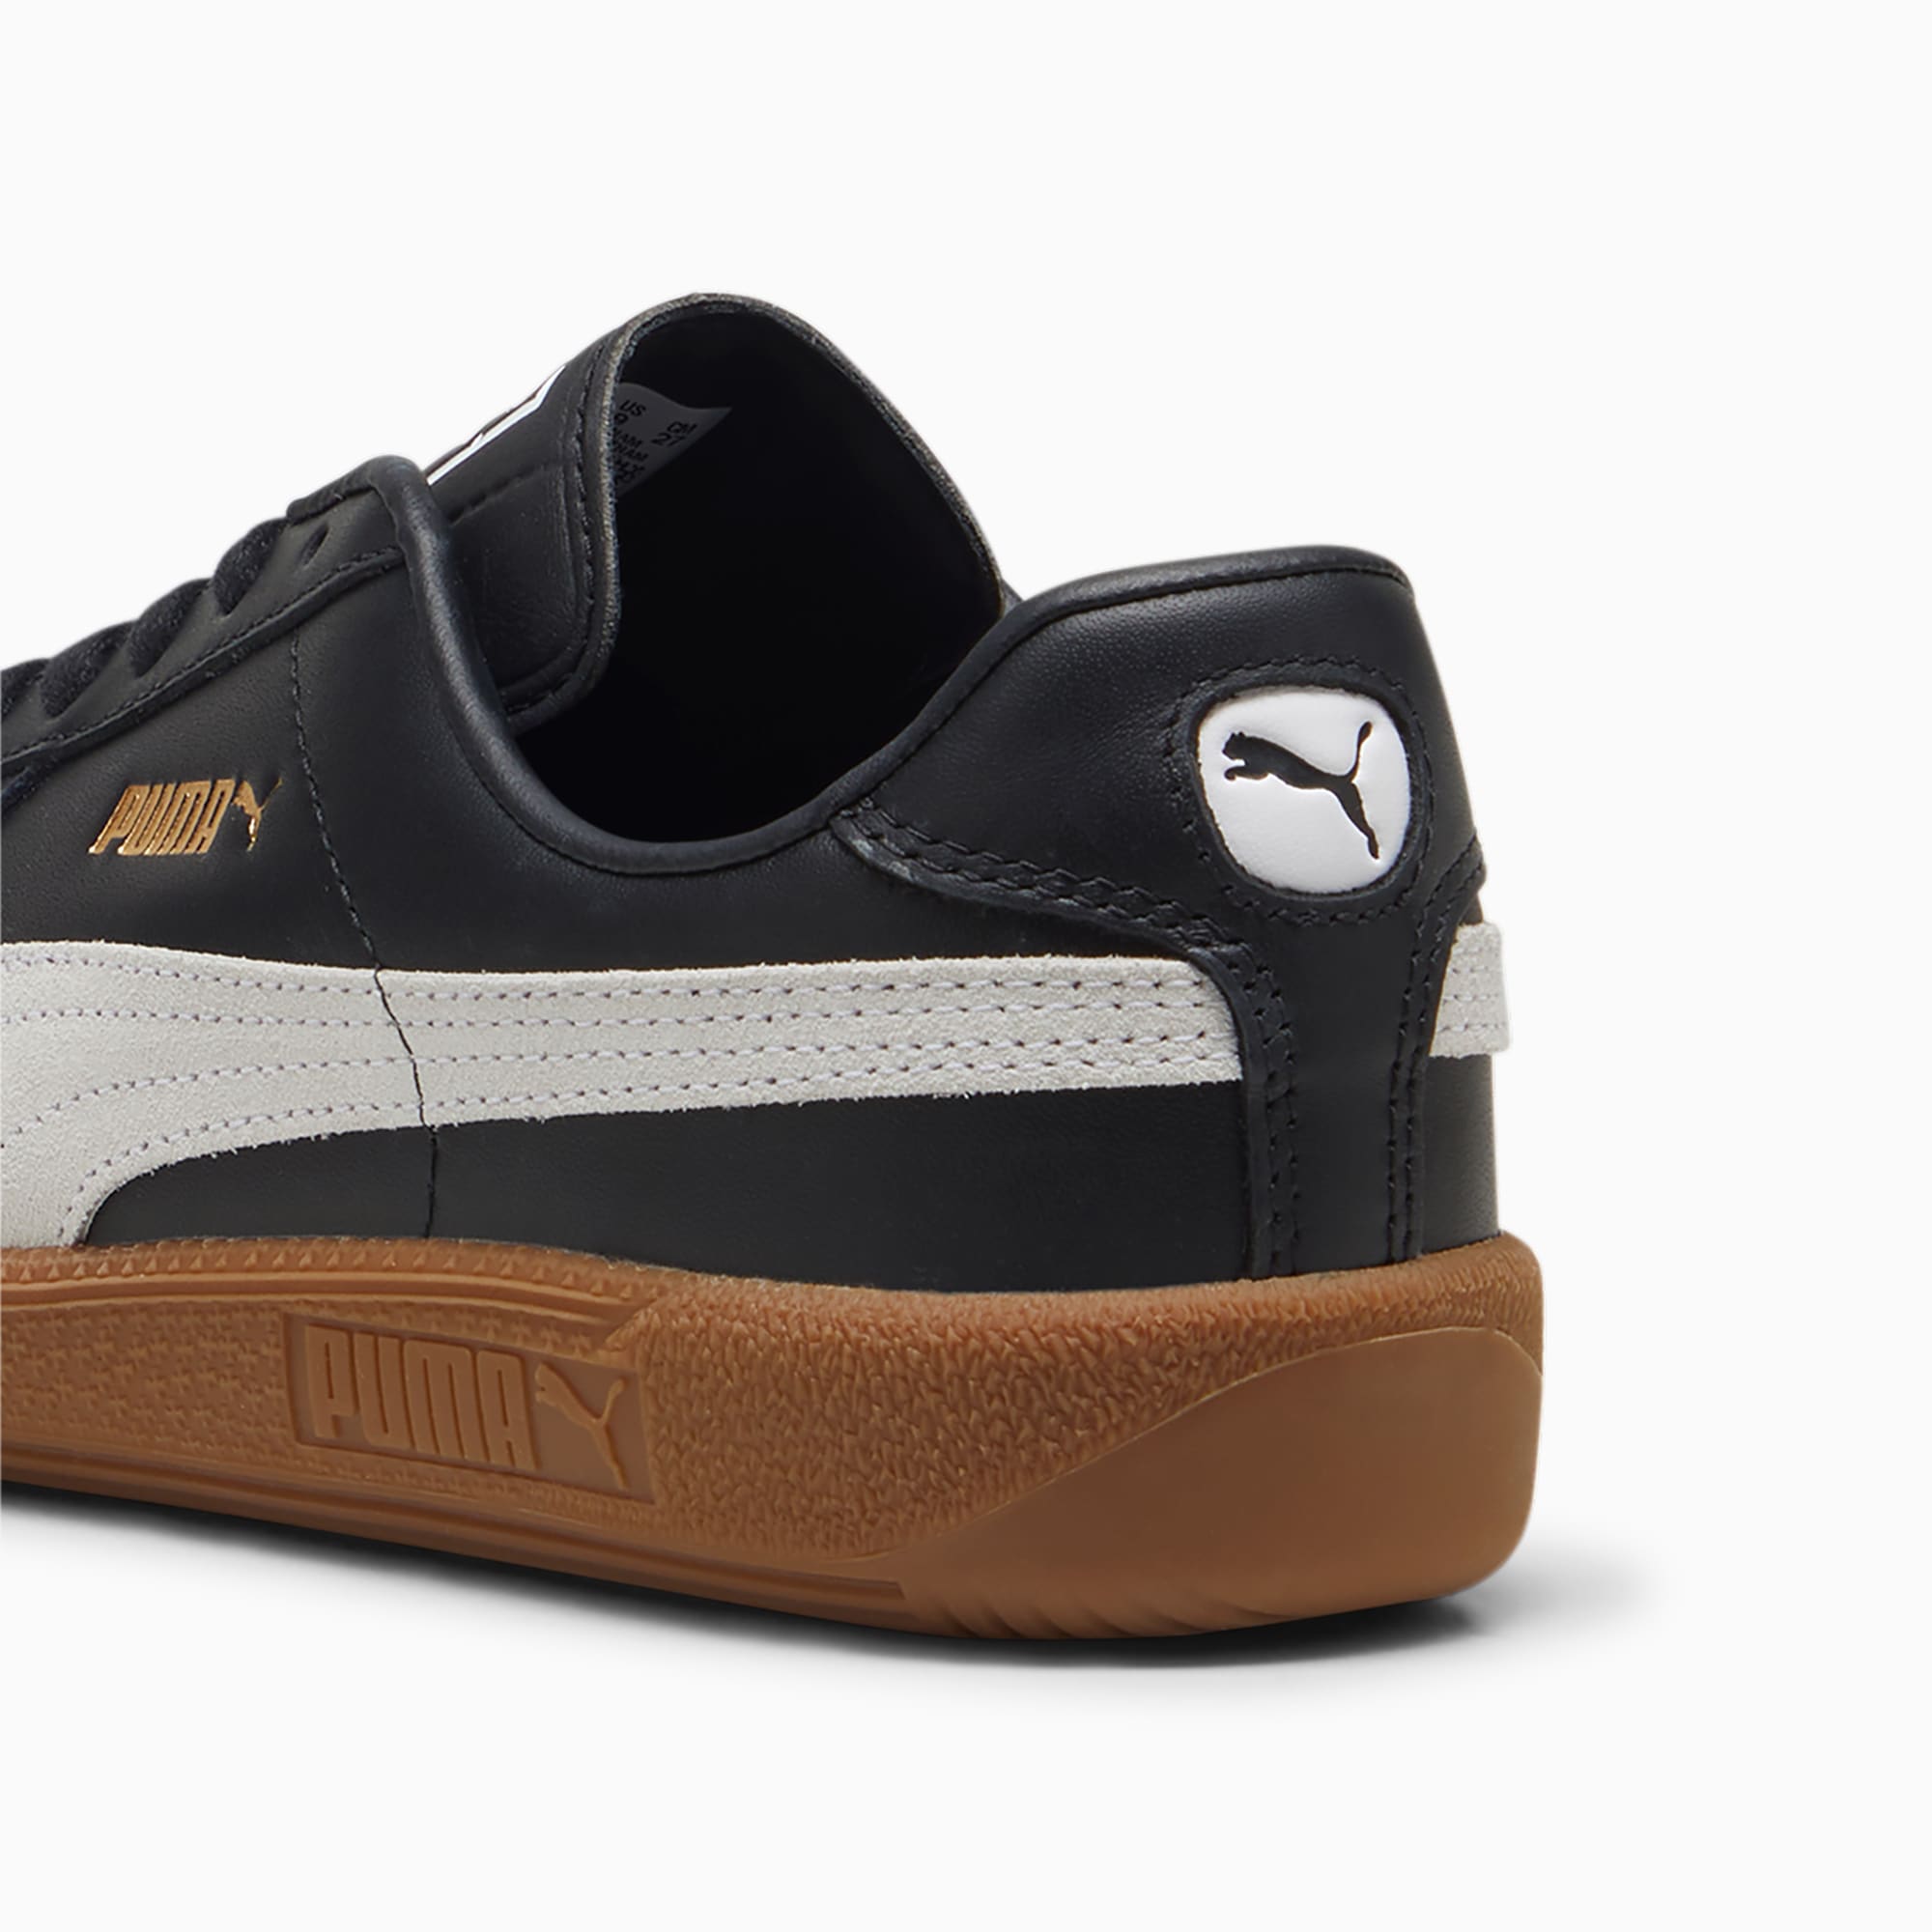 Women's PUMA Army Trainer Sneakers, Black/White/Gum, Size 39, Shoes